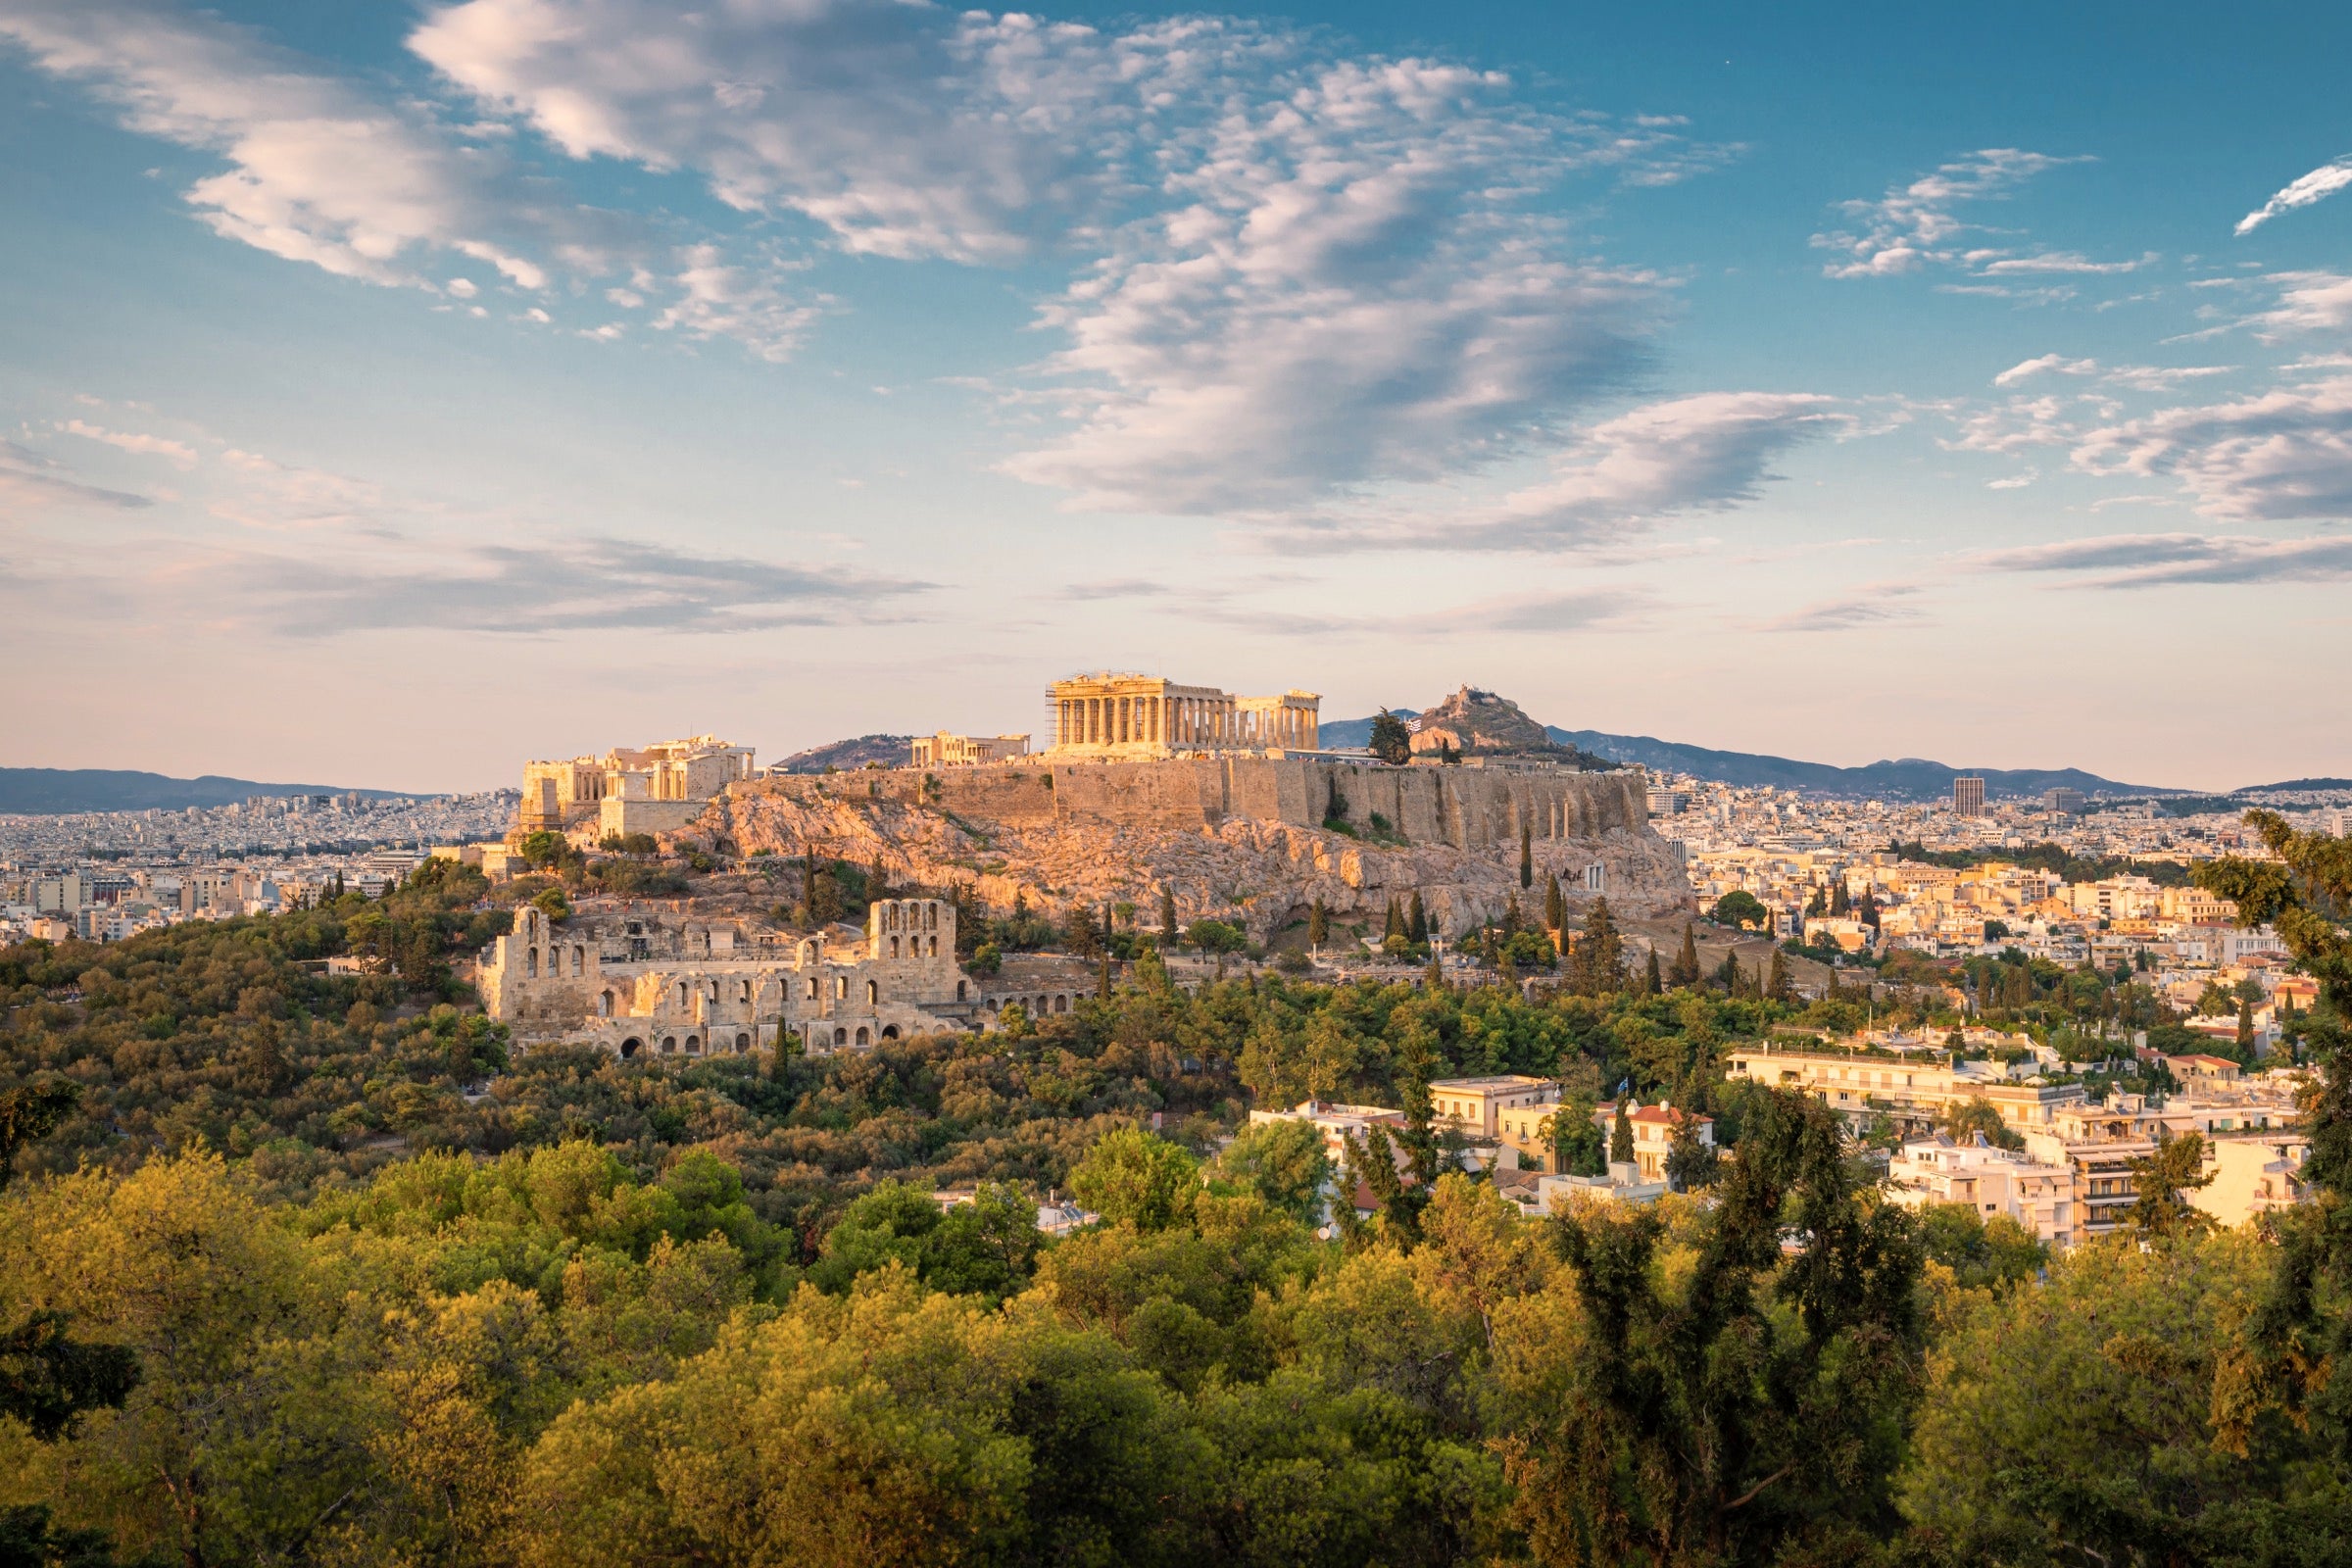 Round-trip flights to Greece from multiple US cities starting at $551